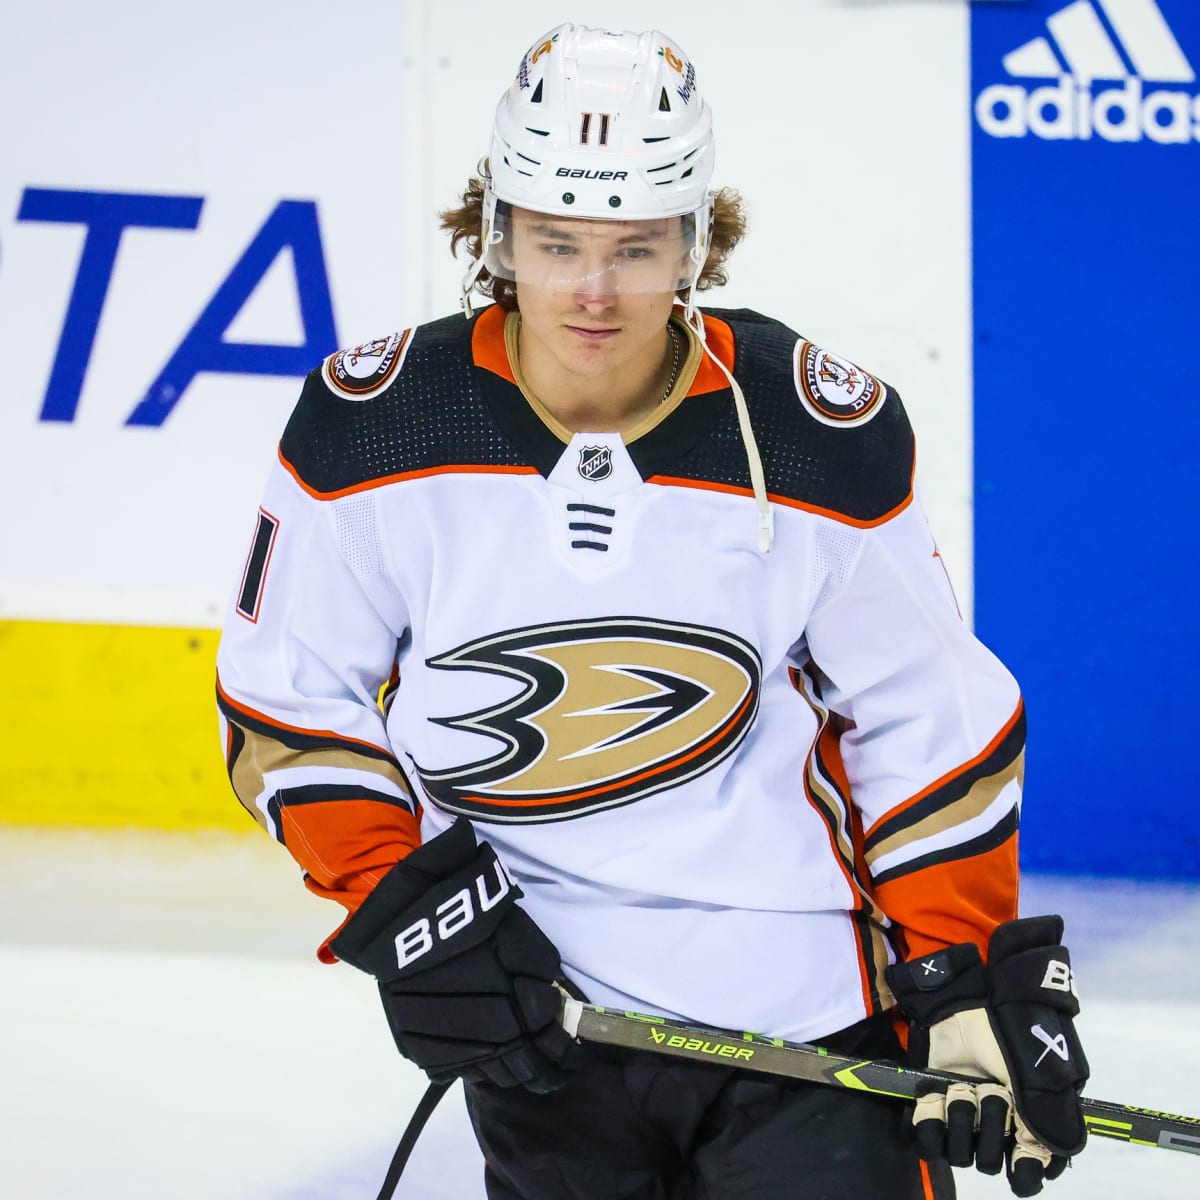 Zegras hopeful to ink new deal with Ducks soon